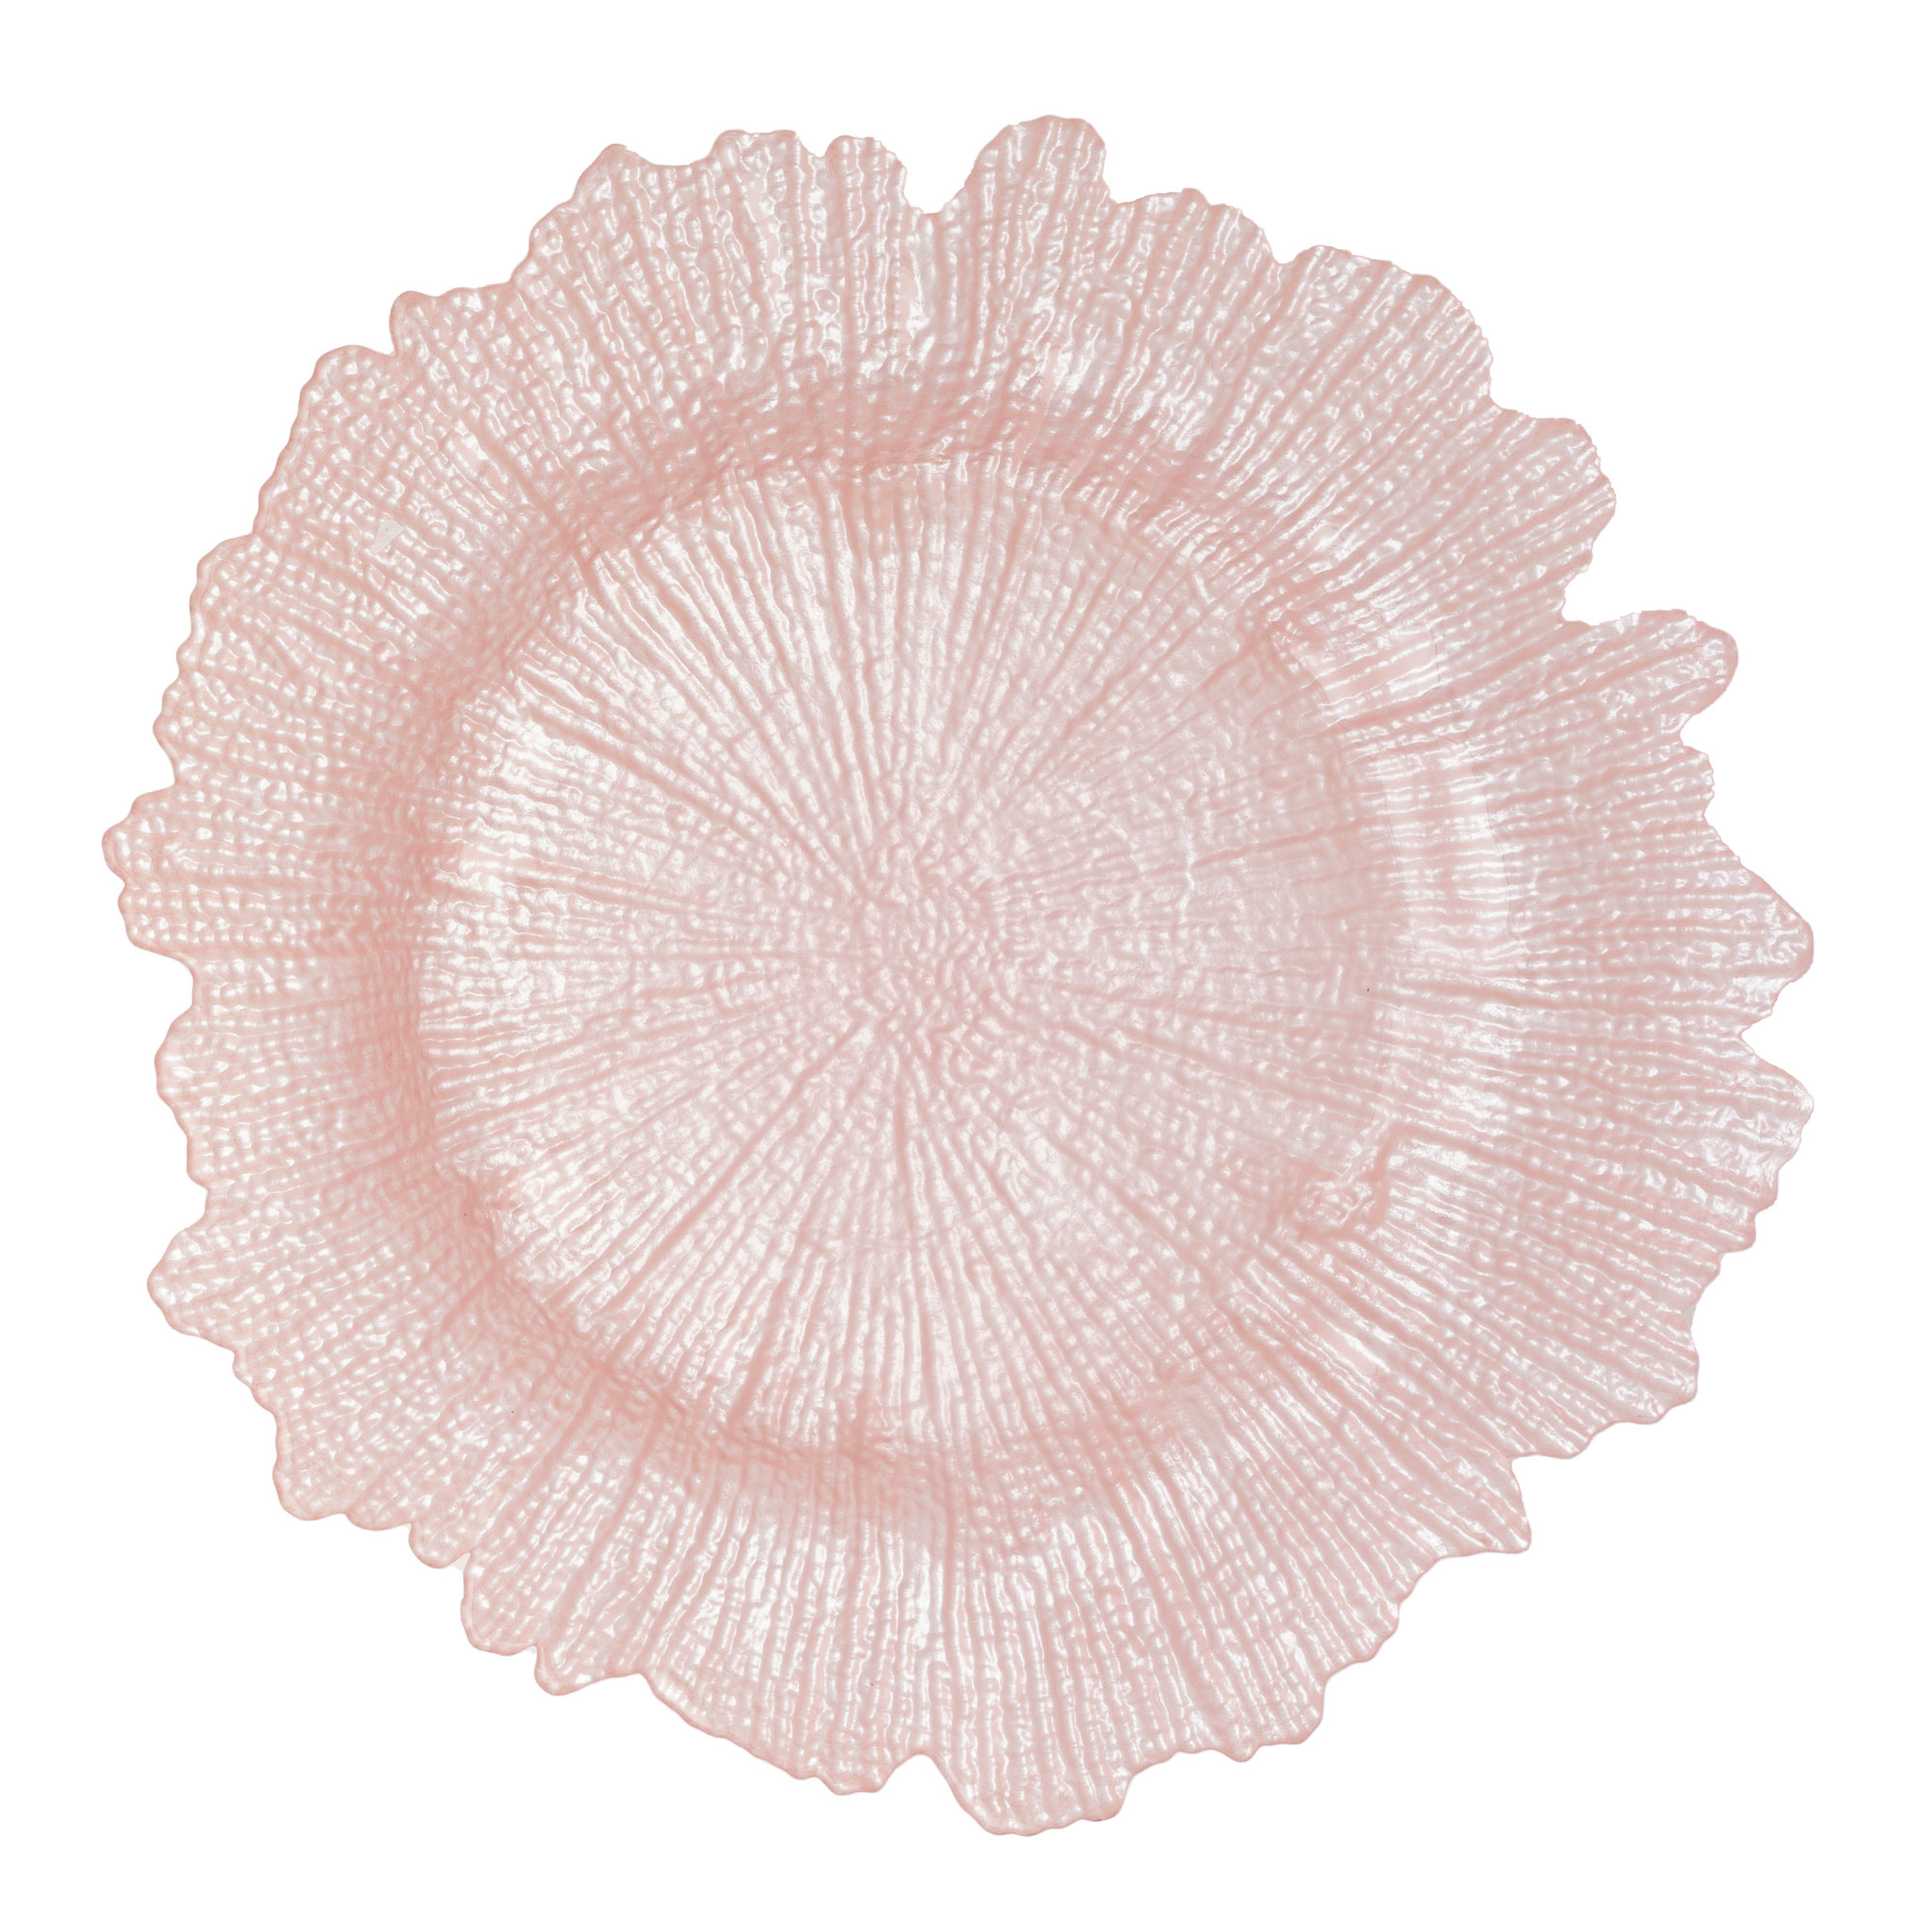 Glass Reef Charger Plate 13" - Blush